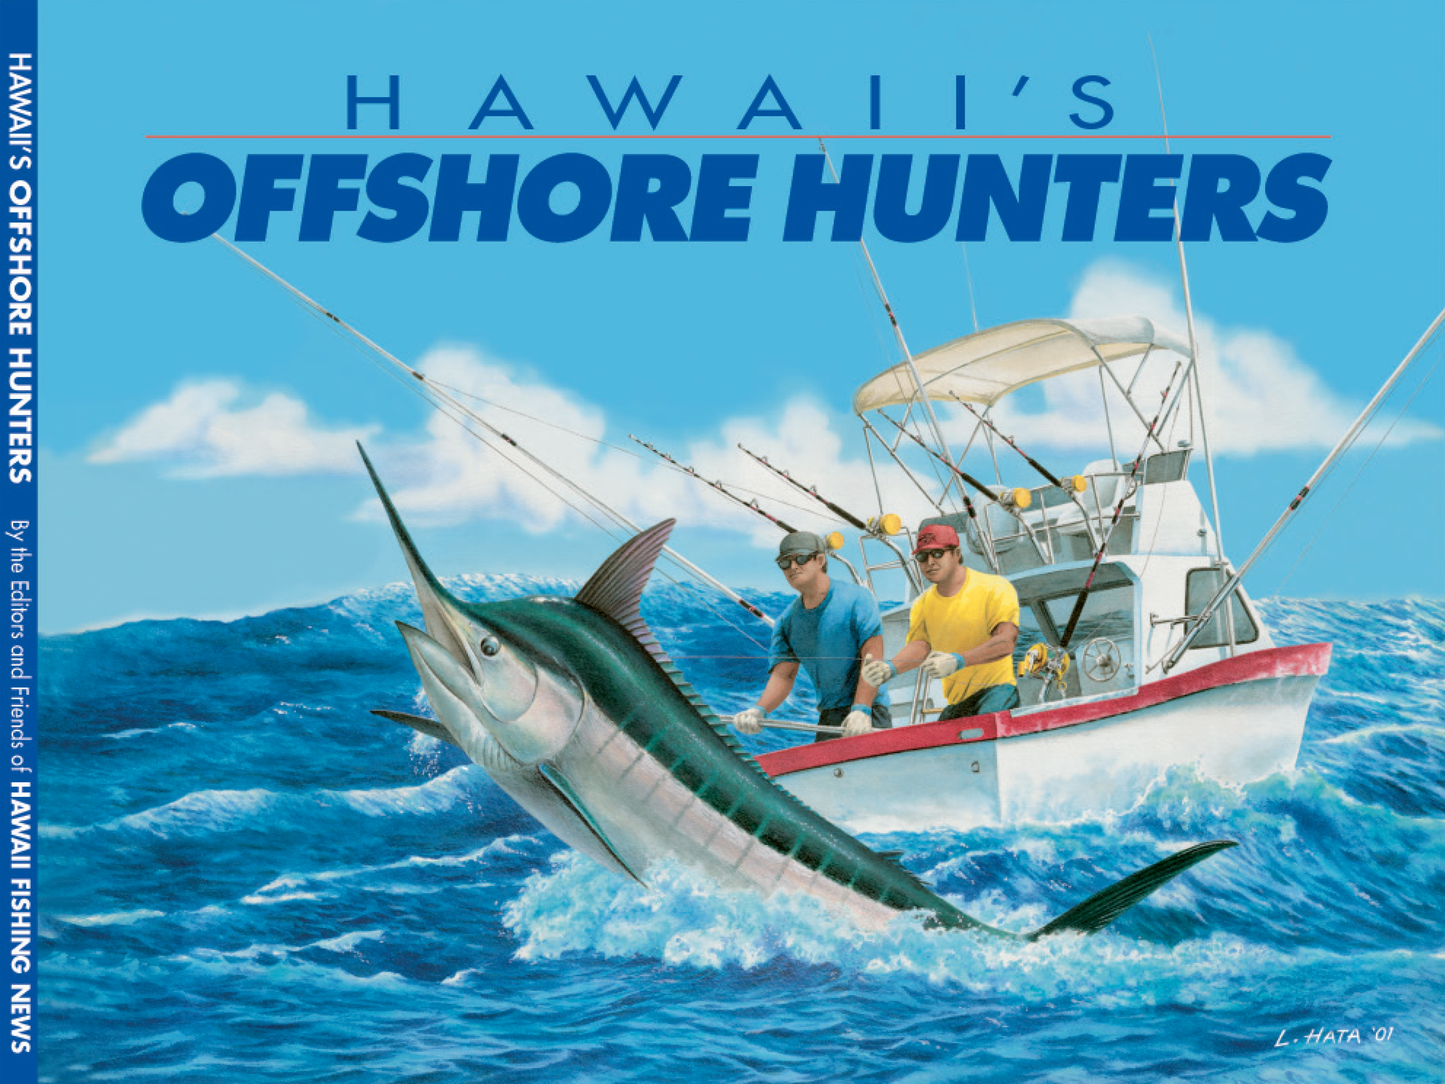 Hawaii's Offshore Hunters - Various HFN Writers  BOOK SALE - LIMITED